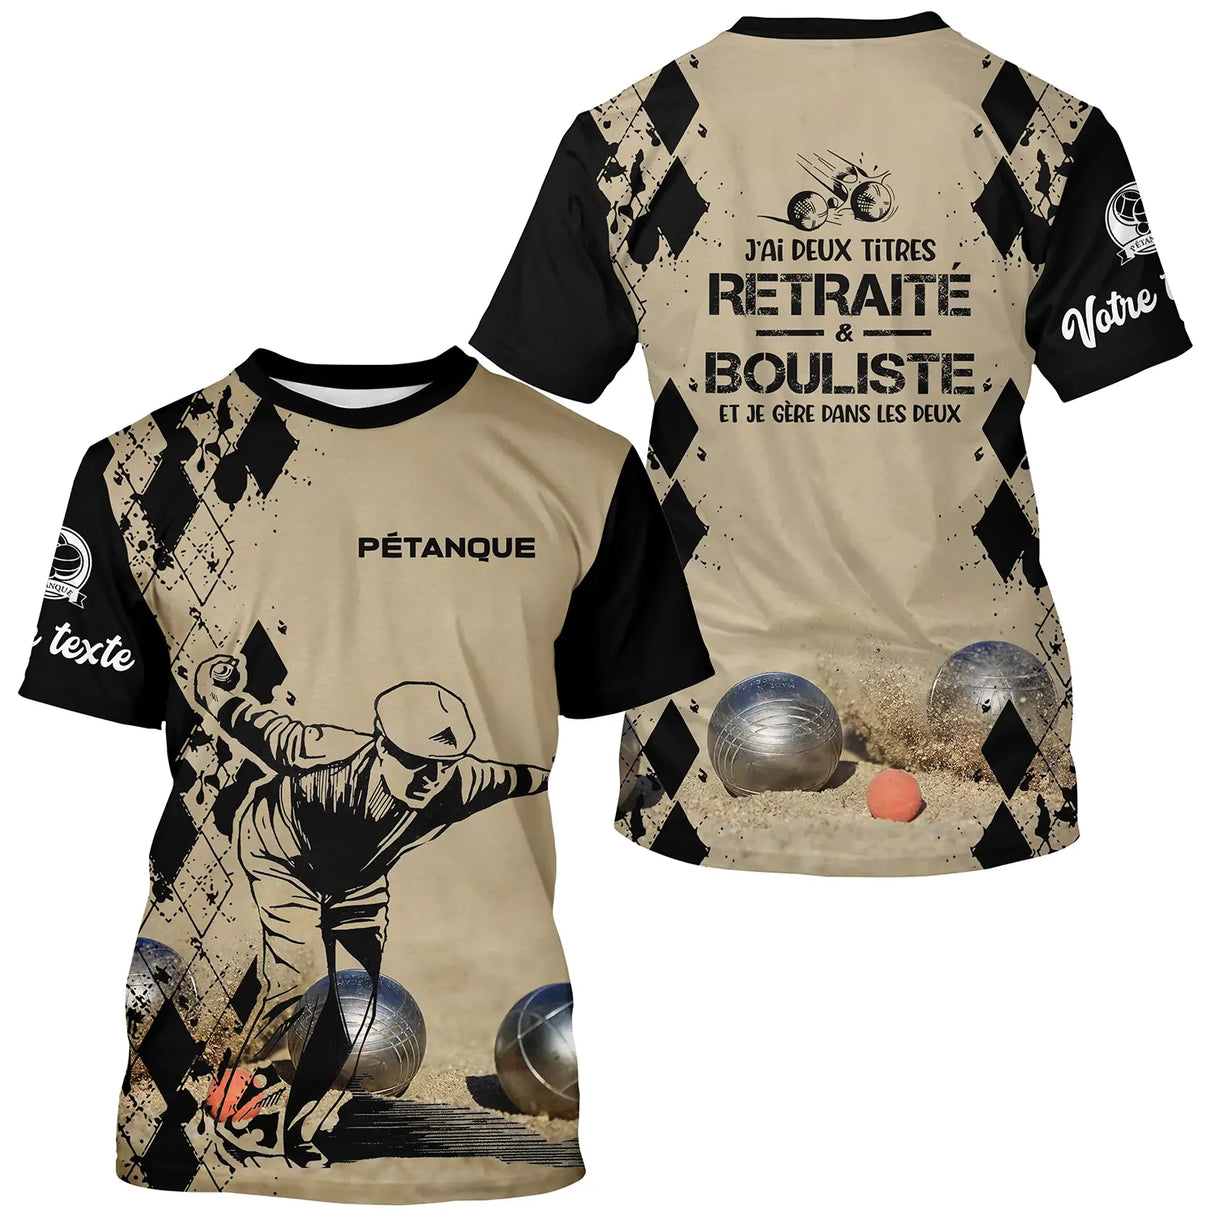 Pétanque T-shirt, Personalized Humor Gift Bouliste, I have two titles Retired and Bouliste - CT13092368